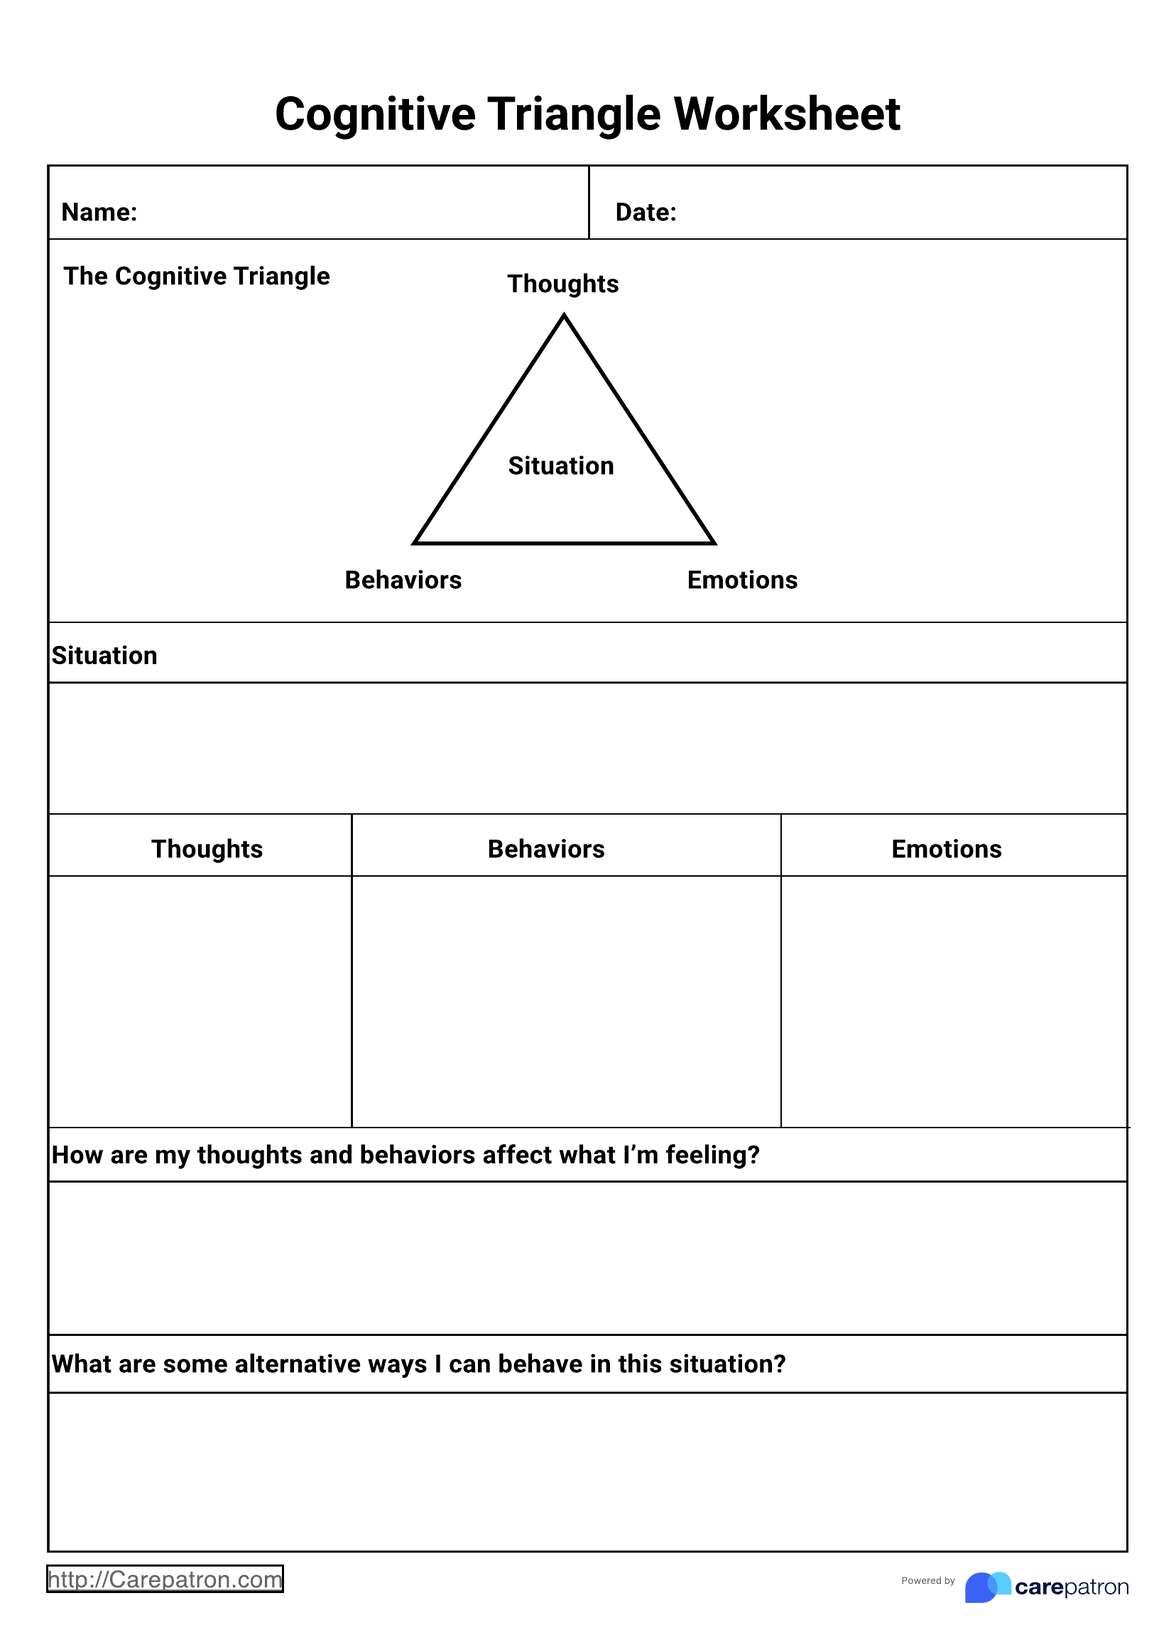 Cognitive Triangle Worksheet PDF Example